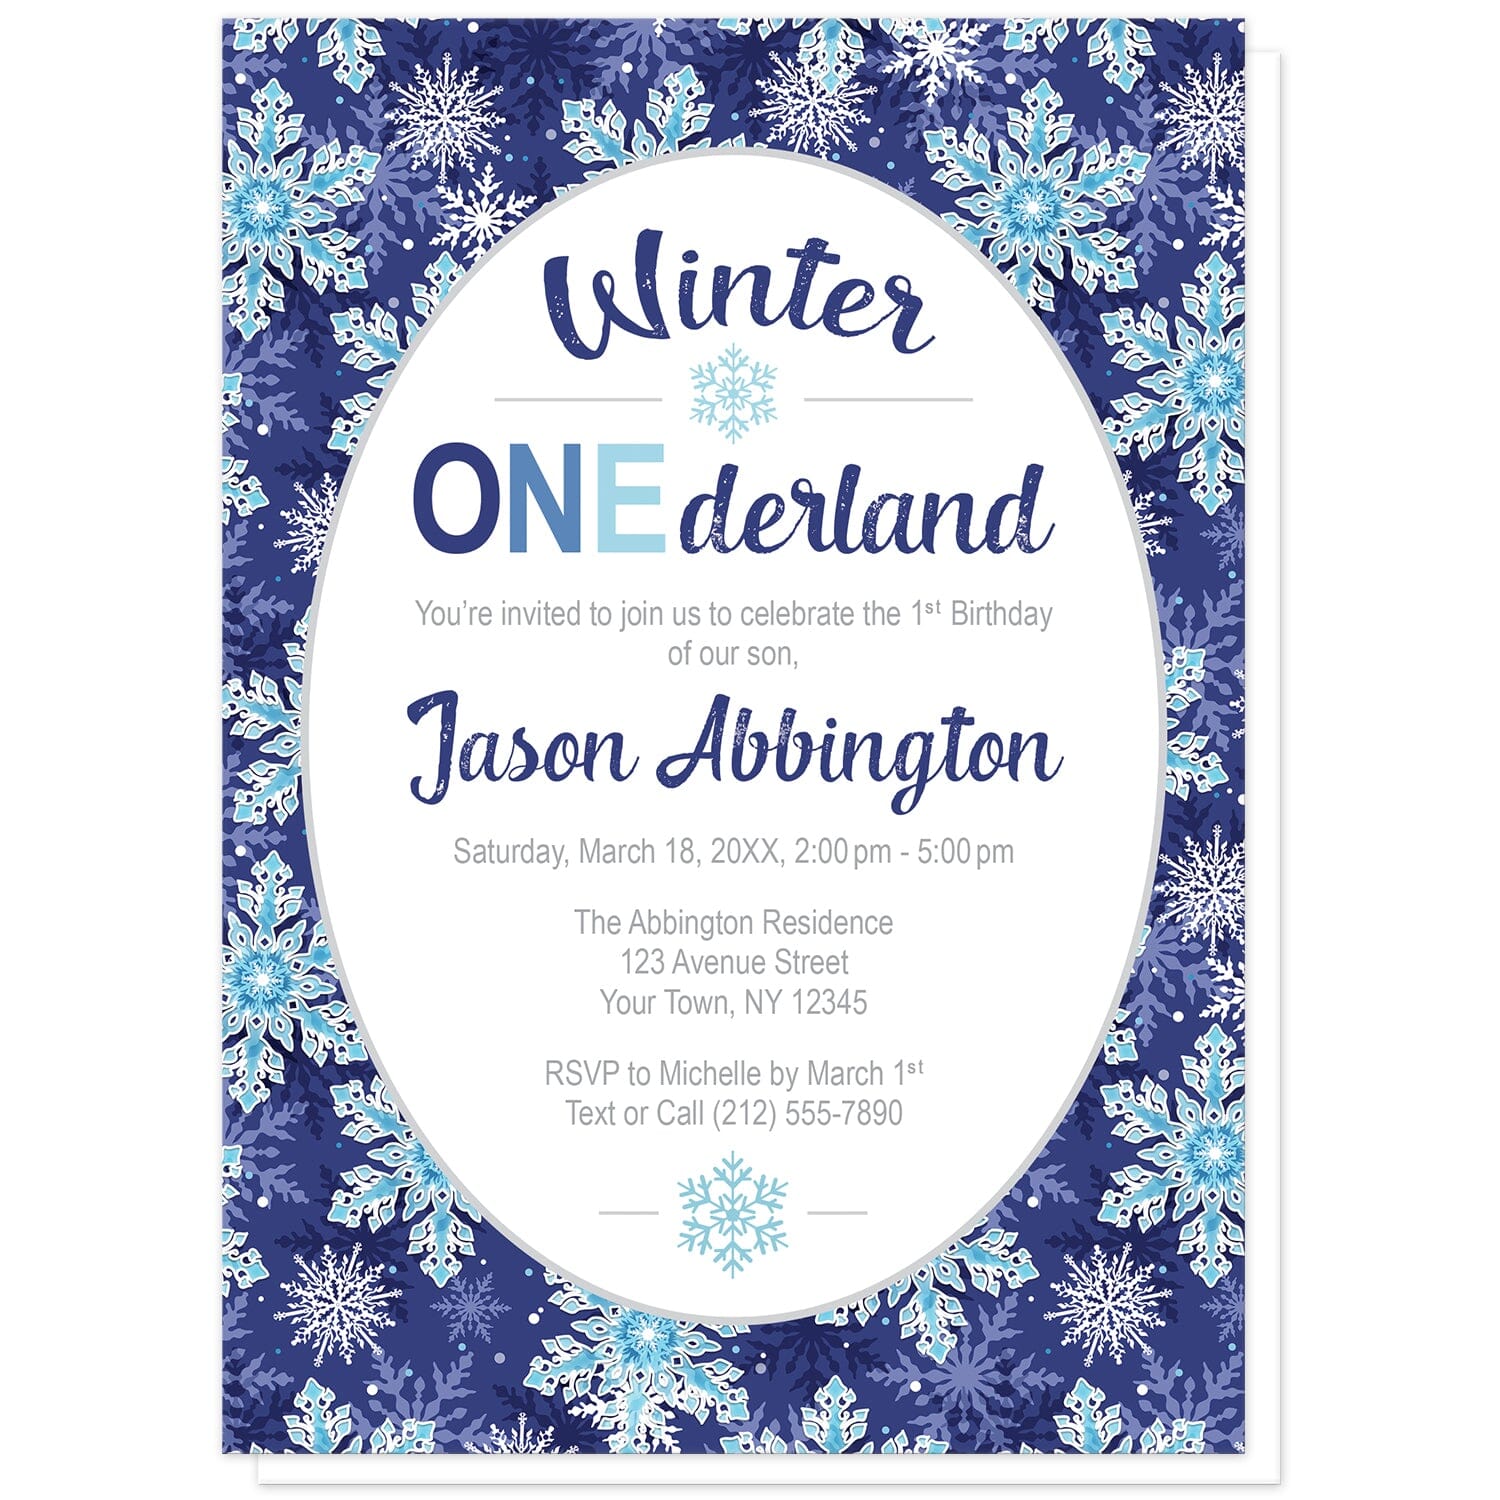 Navy Blue Snowflake 1st Birthday Winter Onederland Invitations at Artistically Invited. Beautifully ornate navy blue snowflake 1st birthday Winter Onederland invitations designed with your personalized 1st birthday party details custom printed in blue and gray in a white oval over a pretty aqua blue and white snowflakes pattern on a navy blue background.